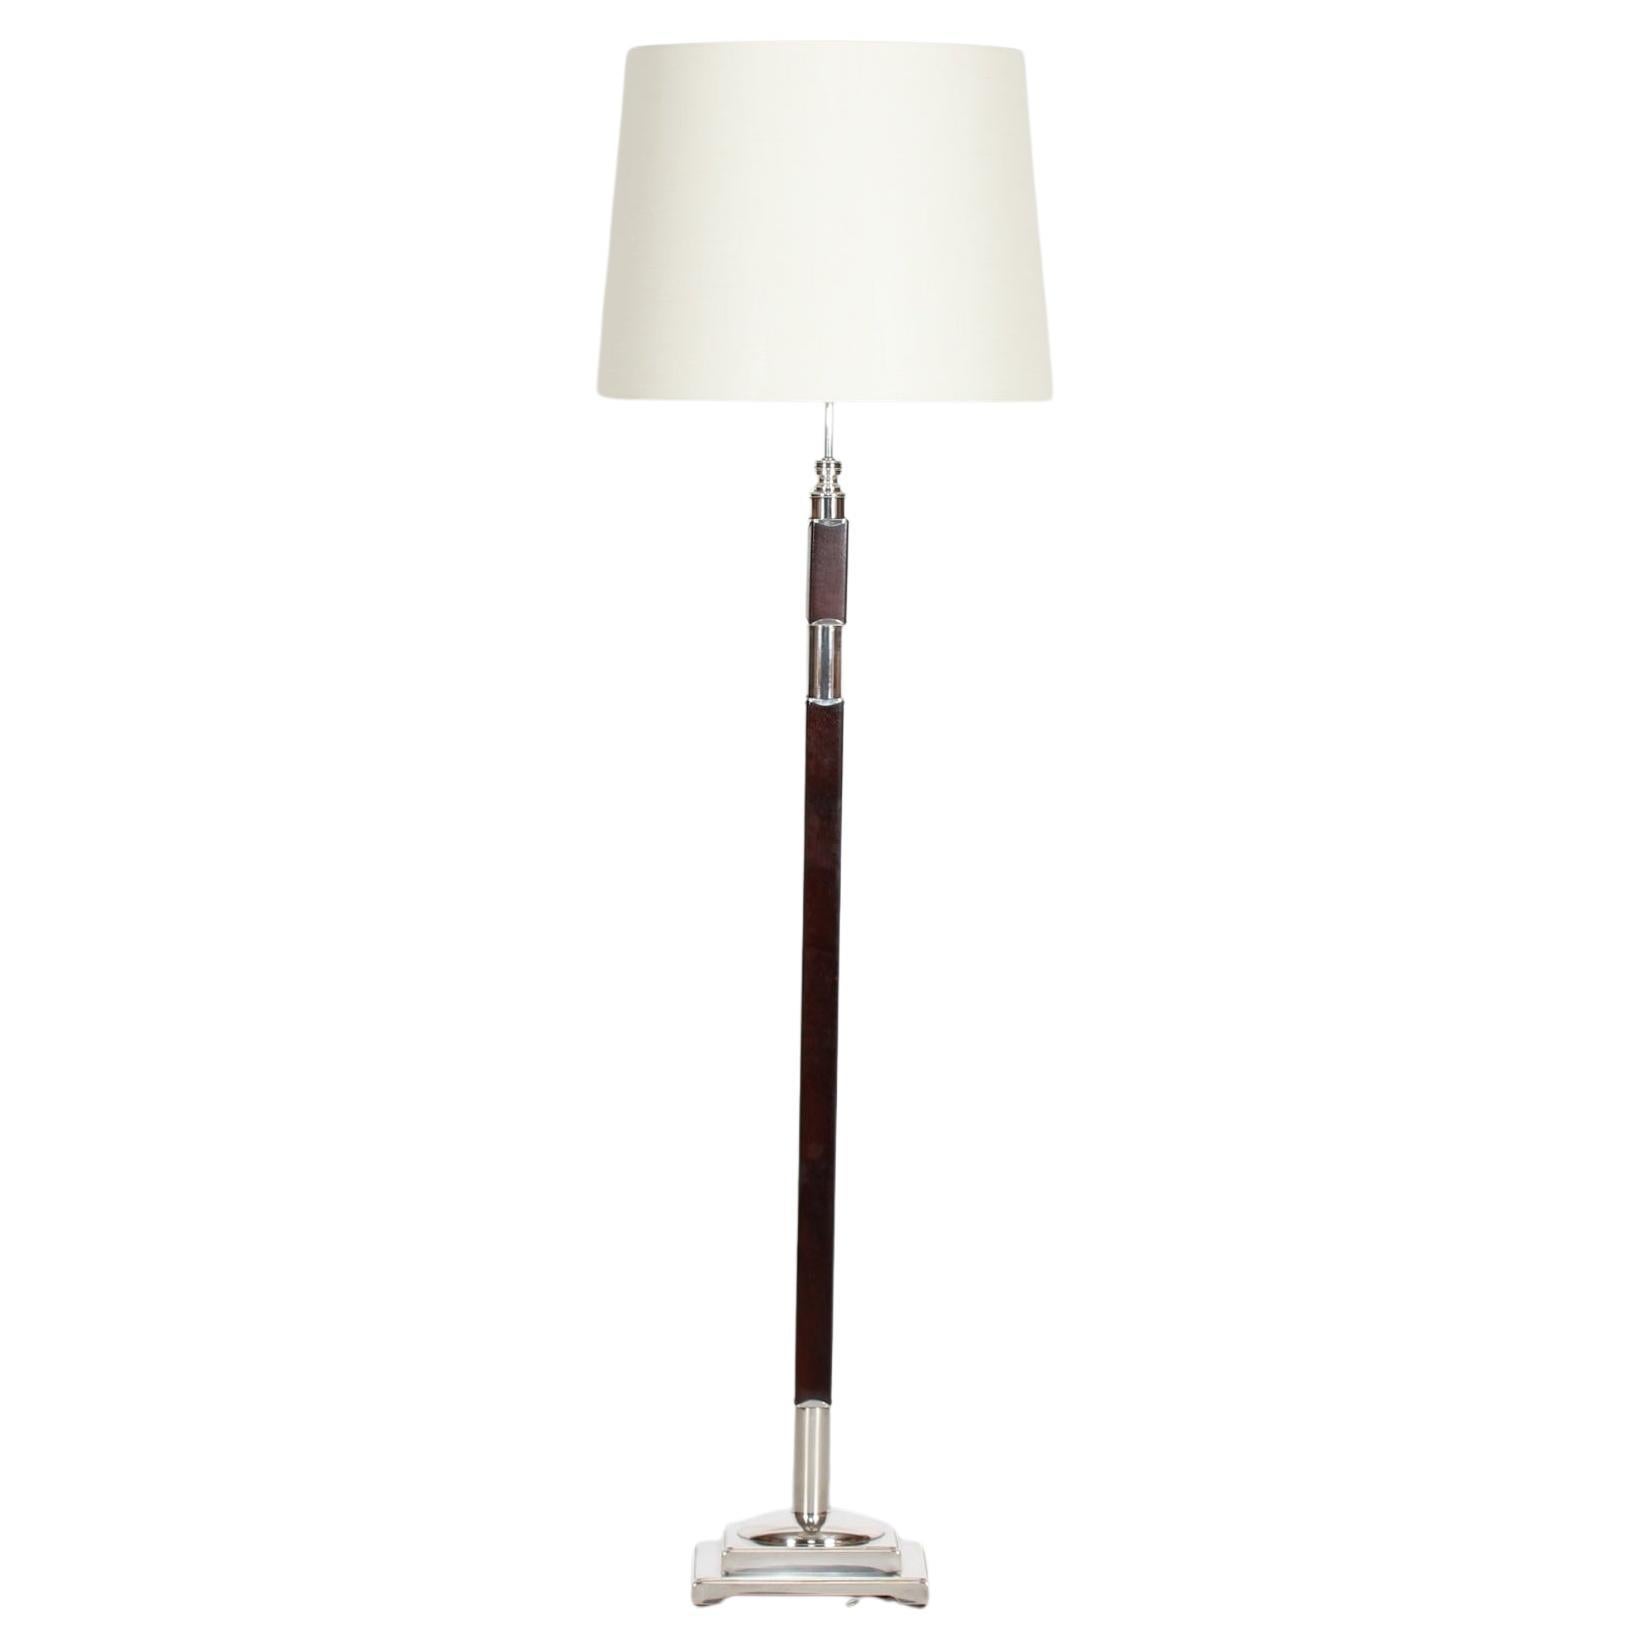 Danish Art Deco Floor Lamp 1940s Silver and Dark Mahogany with New Shade 1940s For Sale